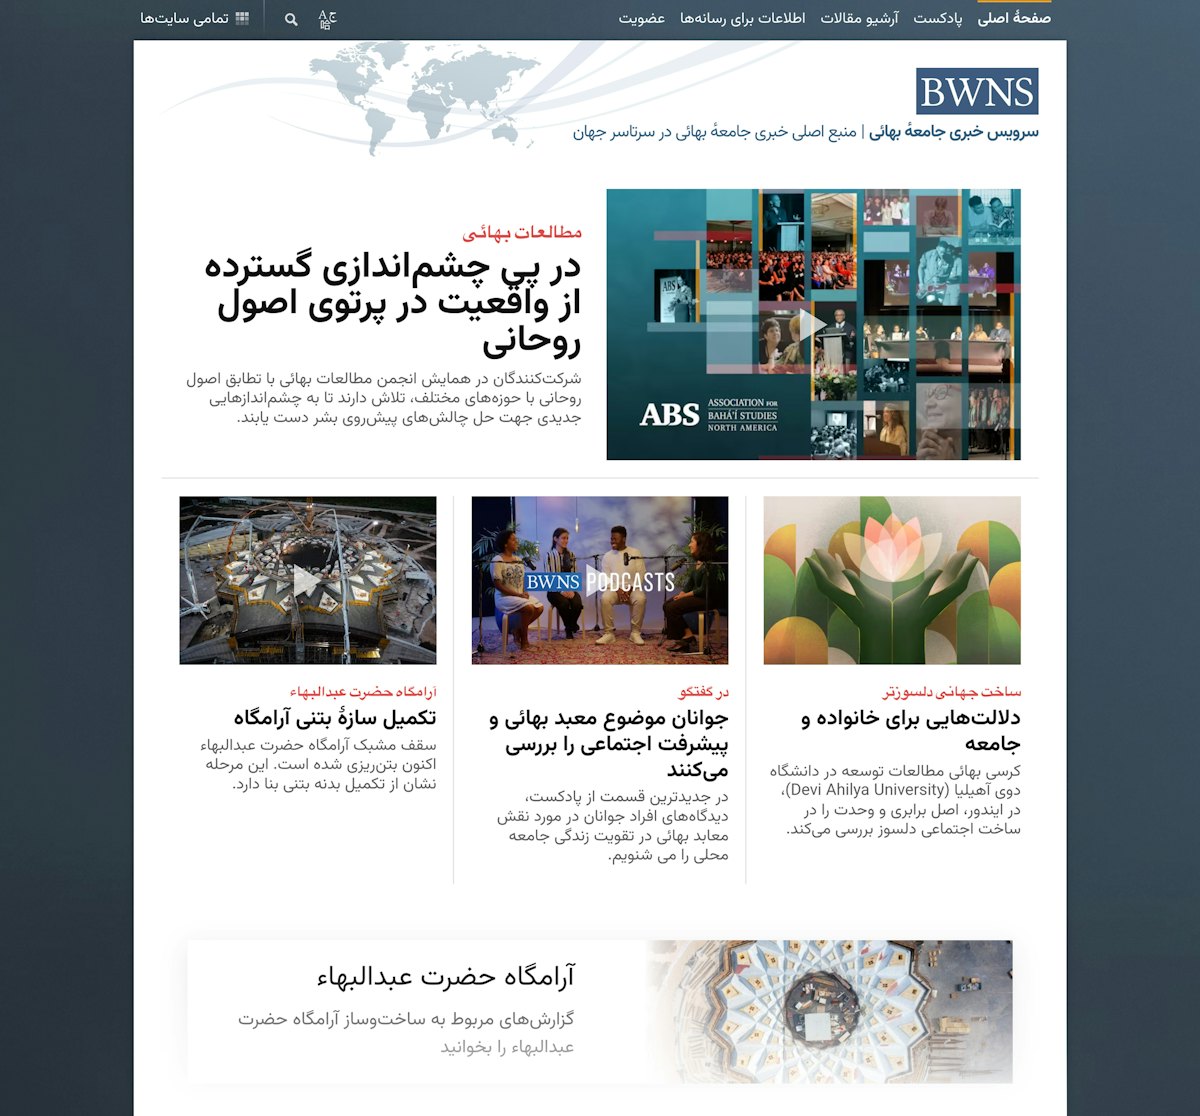 The homepage for the new Persian-language BWNS website.